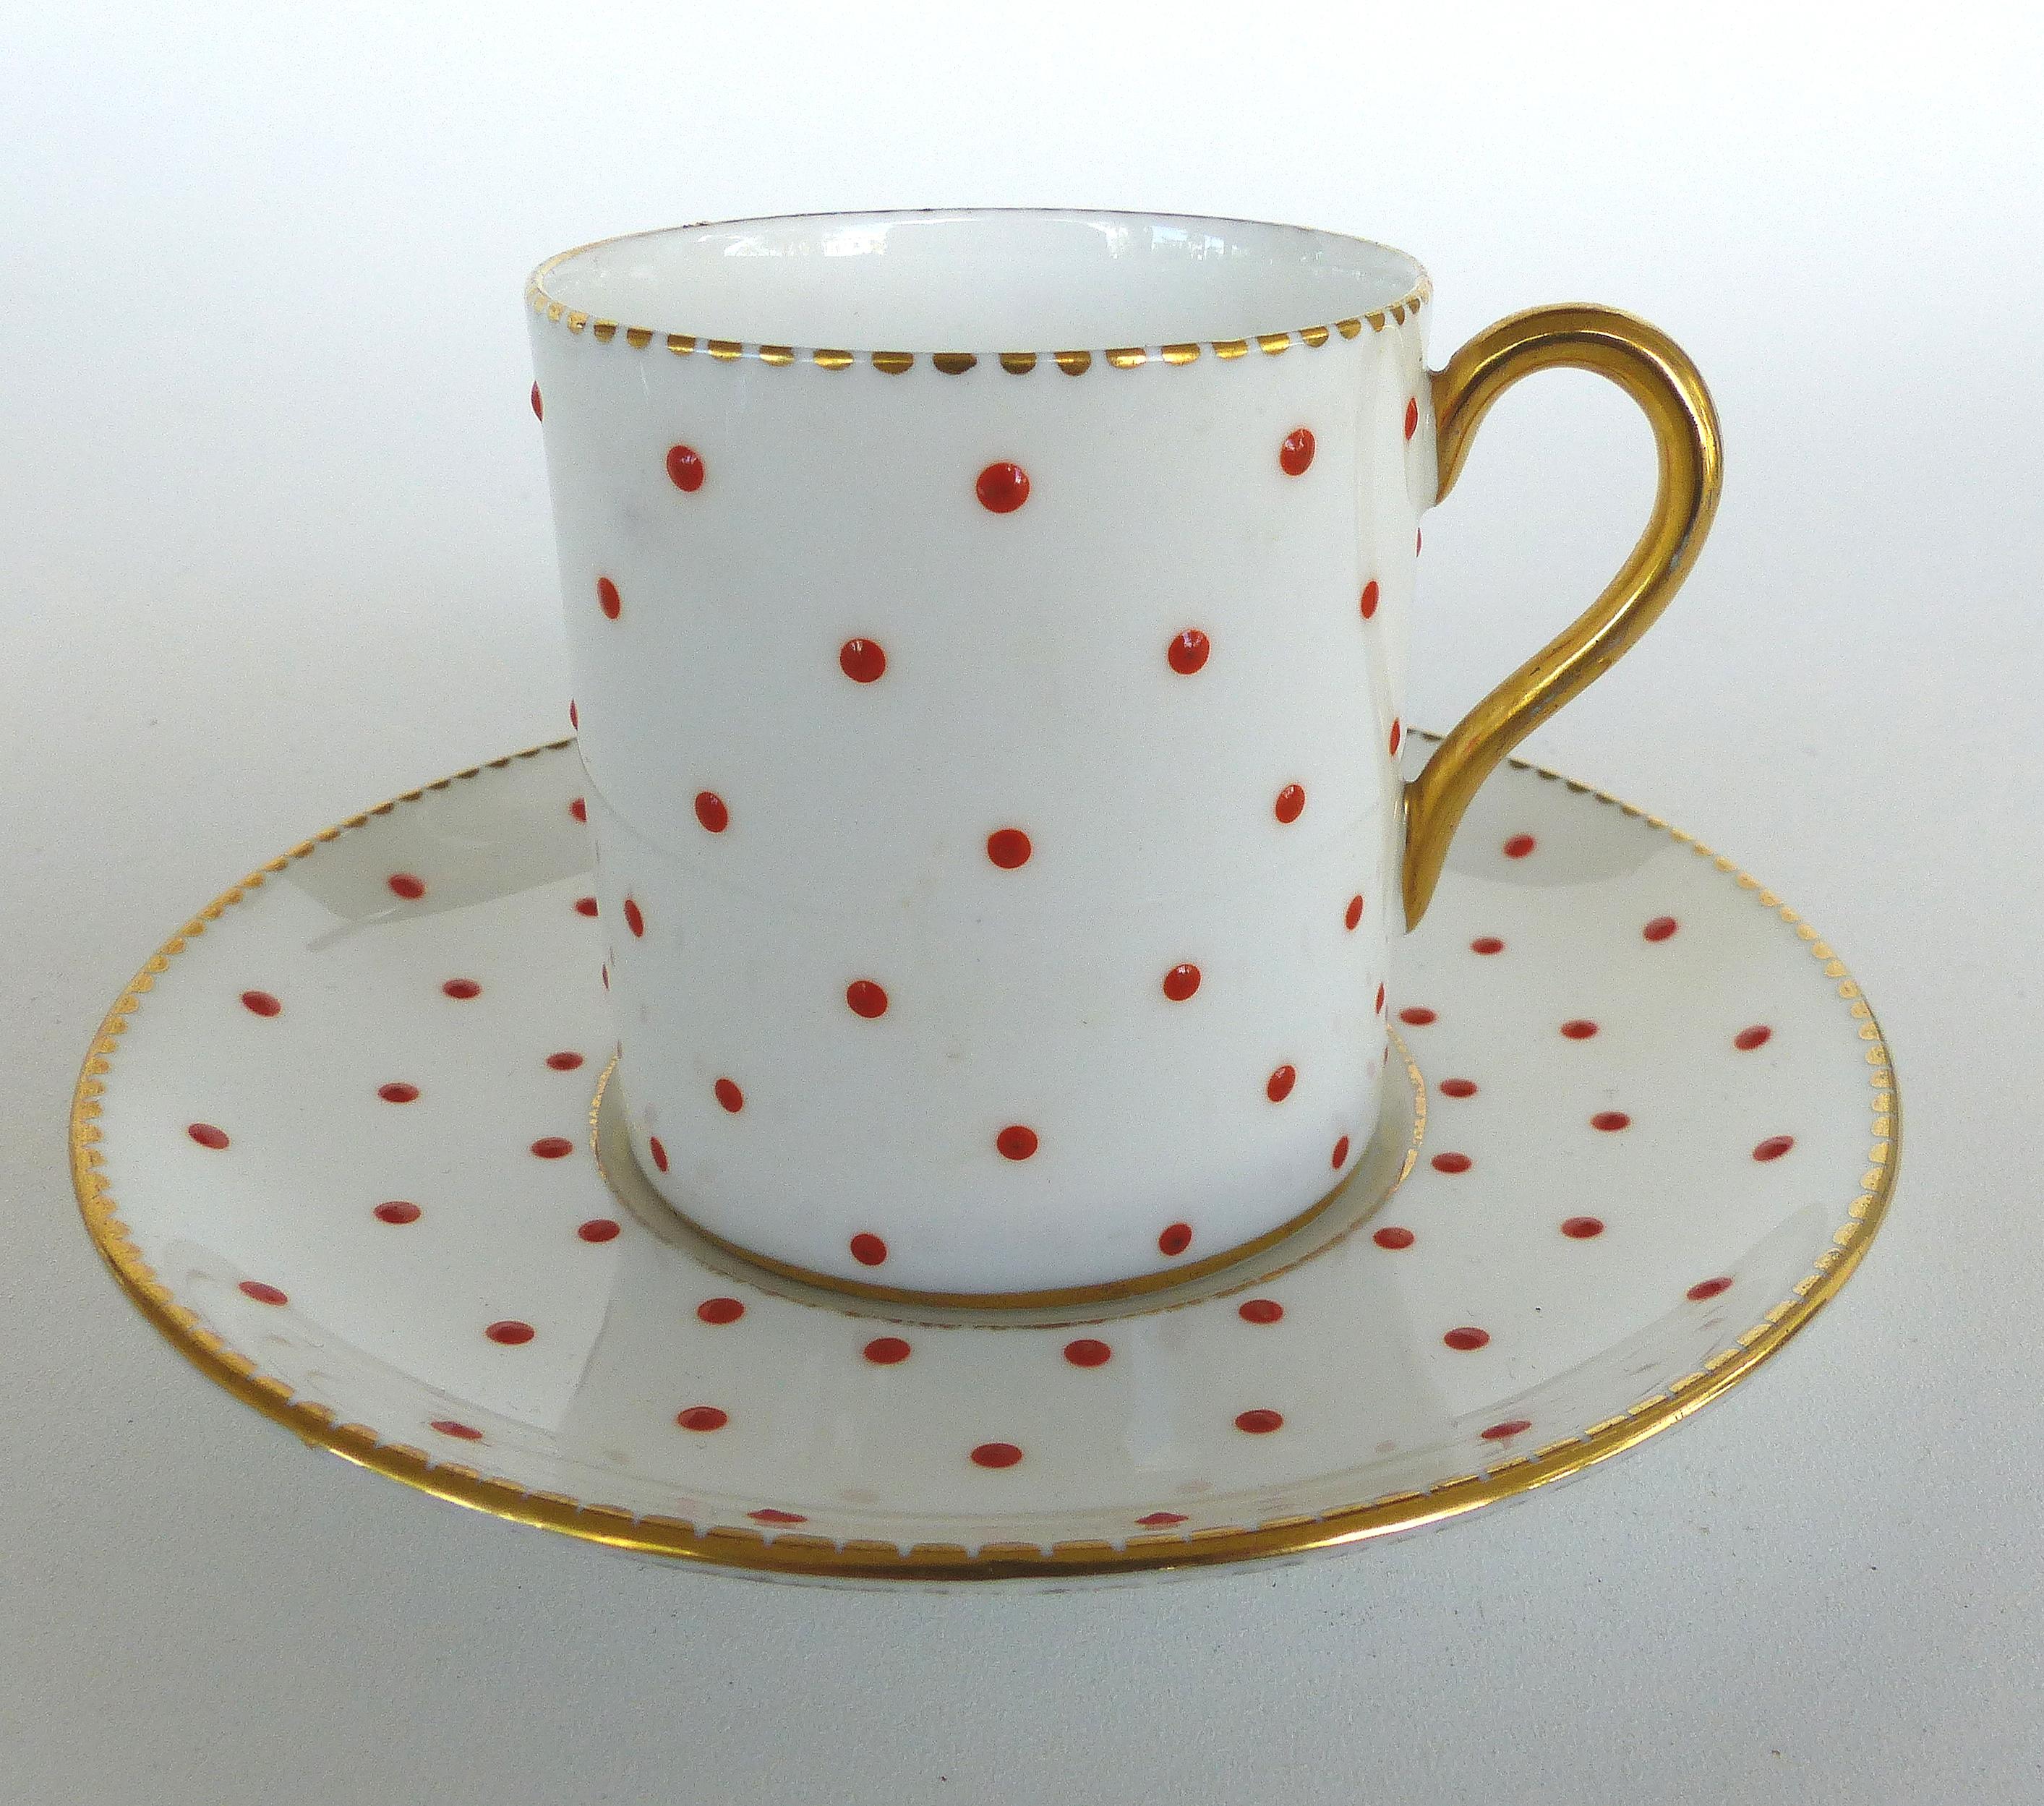 Shelley England Fine Bone China Enameled and Gilt Demitasse Cups and Saucers

Offered for sale is a set of five fine china cups and saucers from Shelly. Each cup and saucer is decorated with raised enamel dots and accented with gold. Cups measure